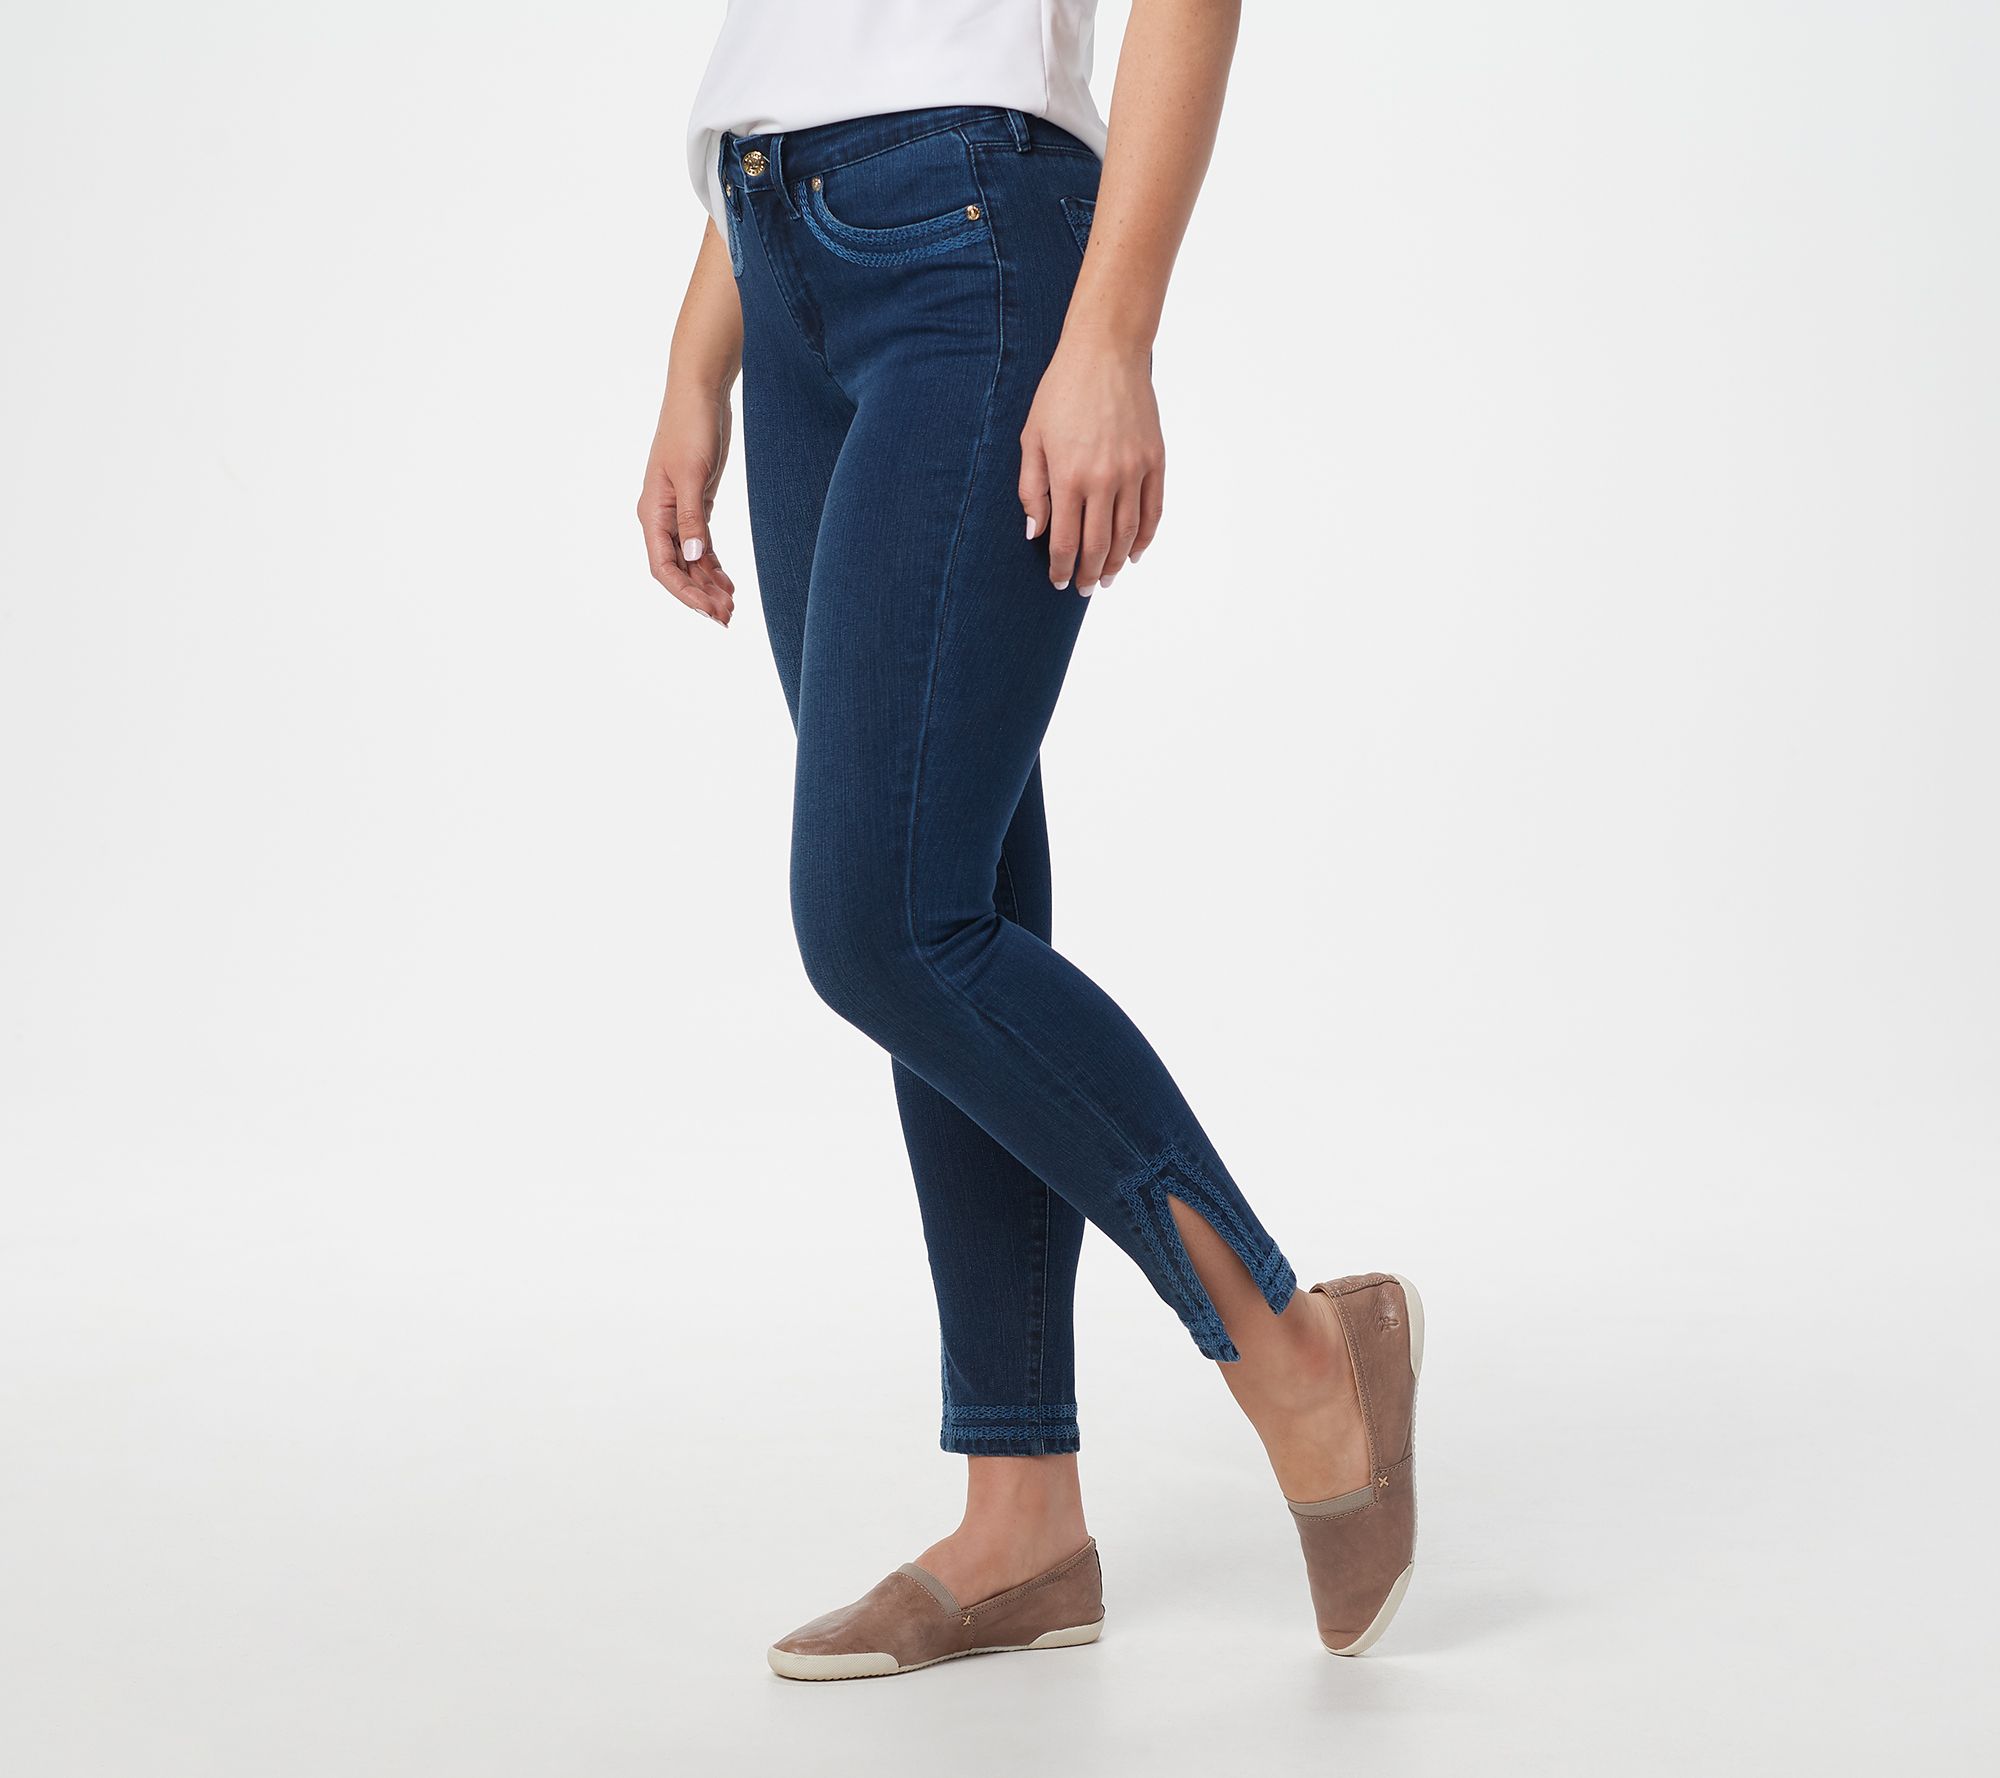 jeans with slits at ankle